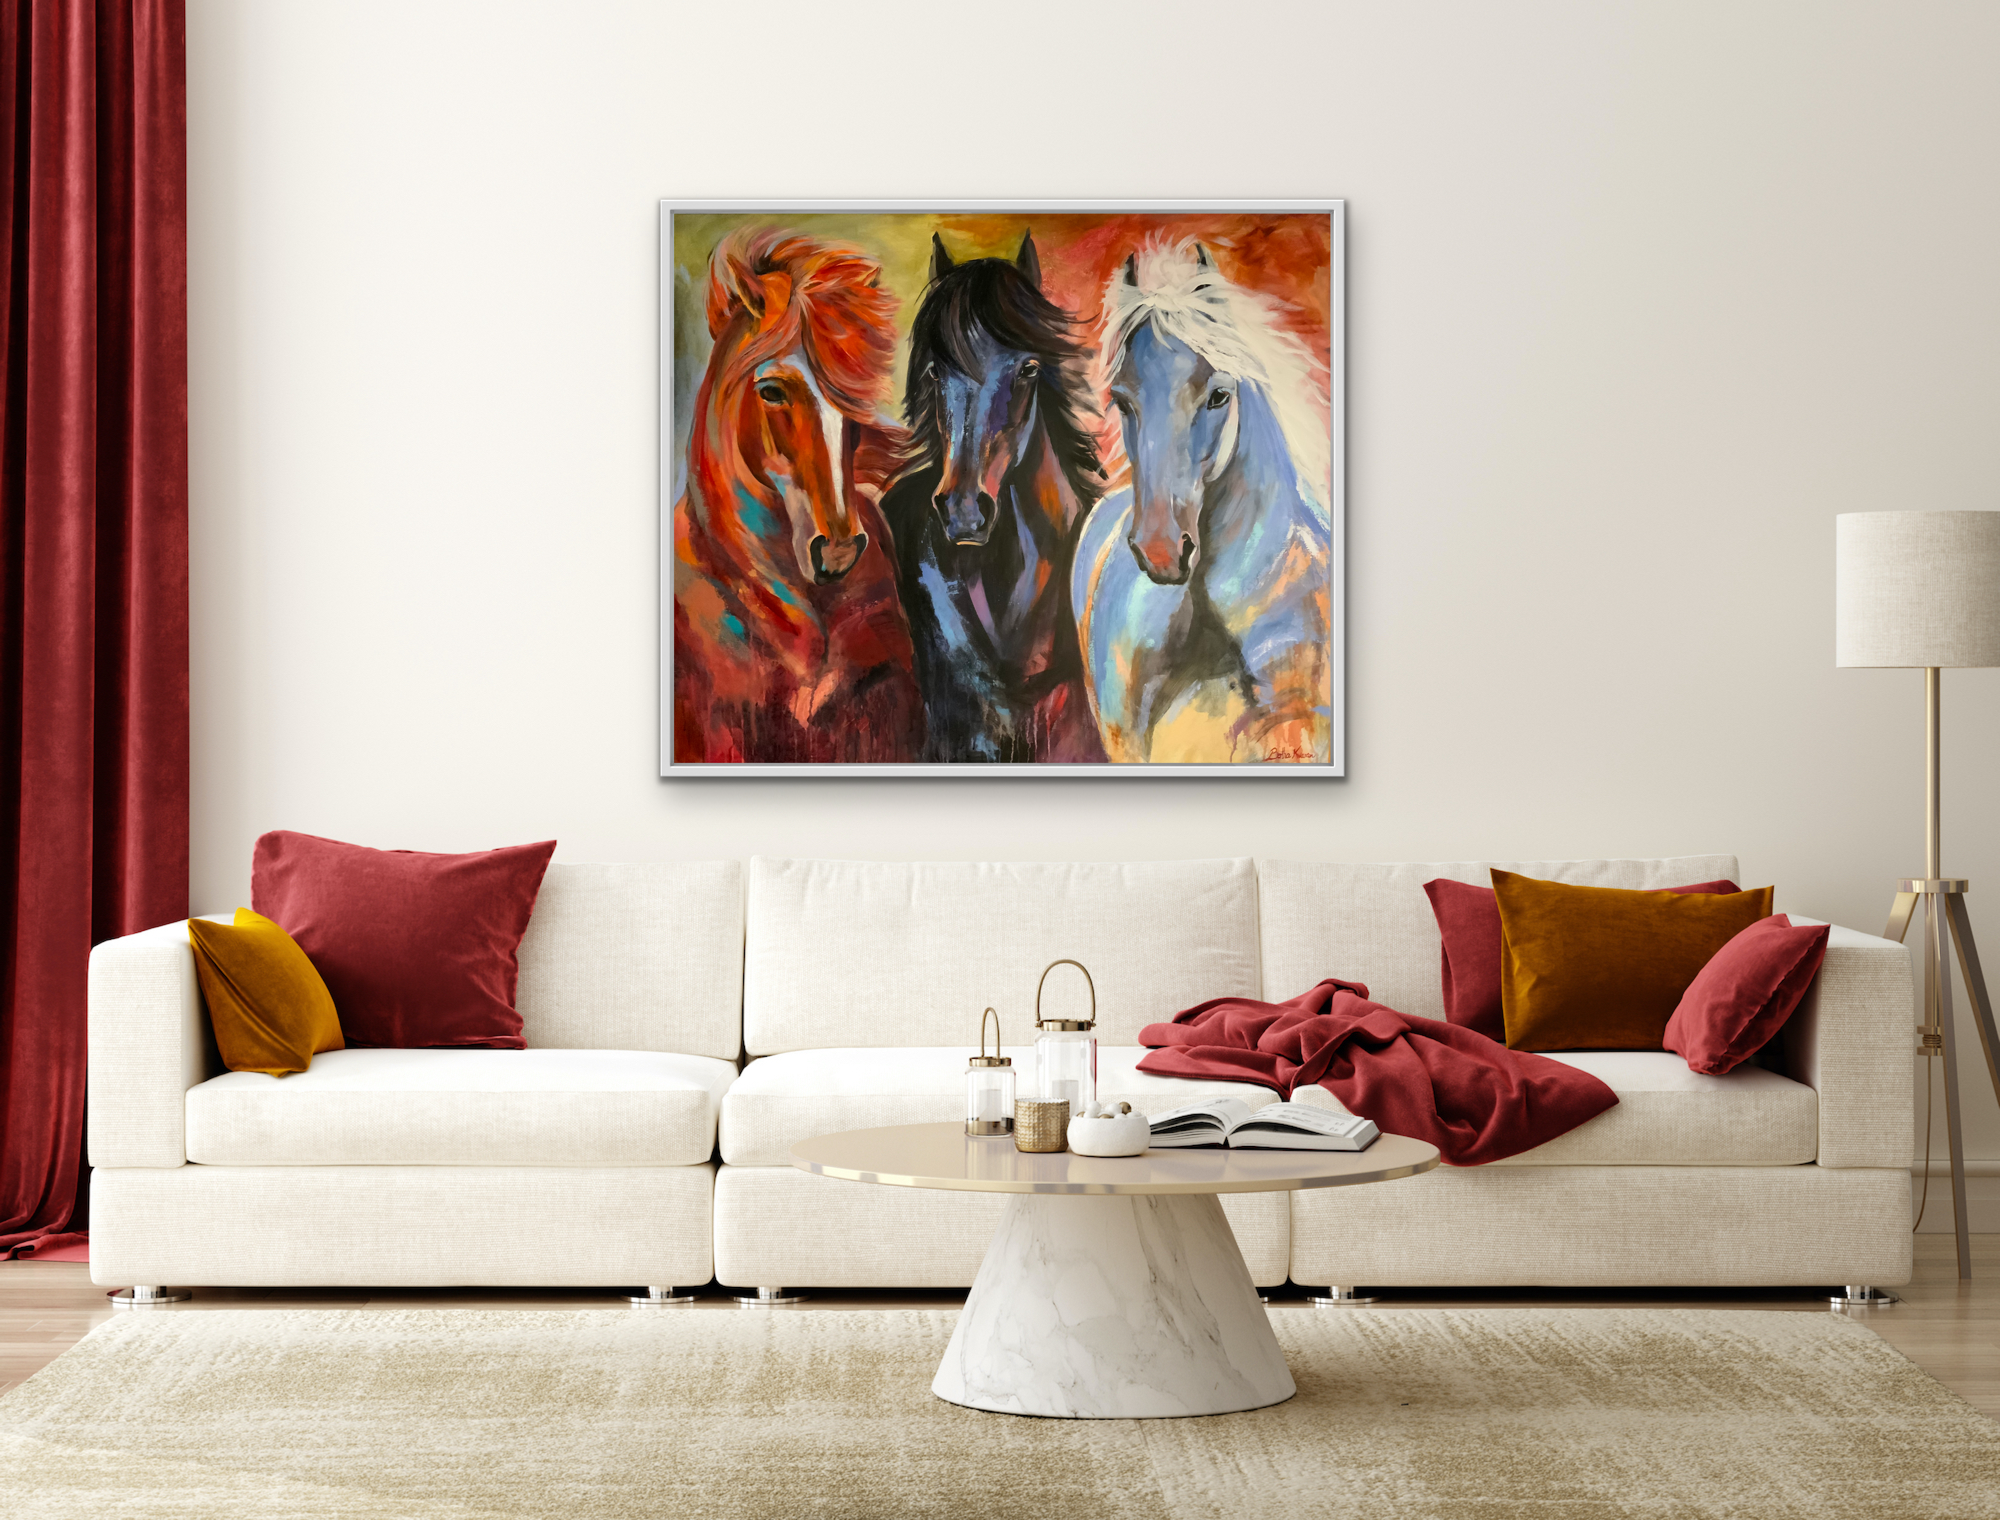 The Three Of Us | abstract painting of three Icelandic horses